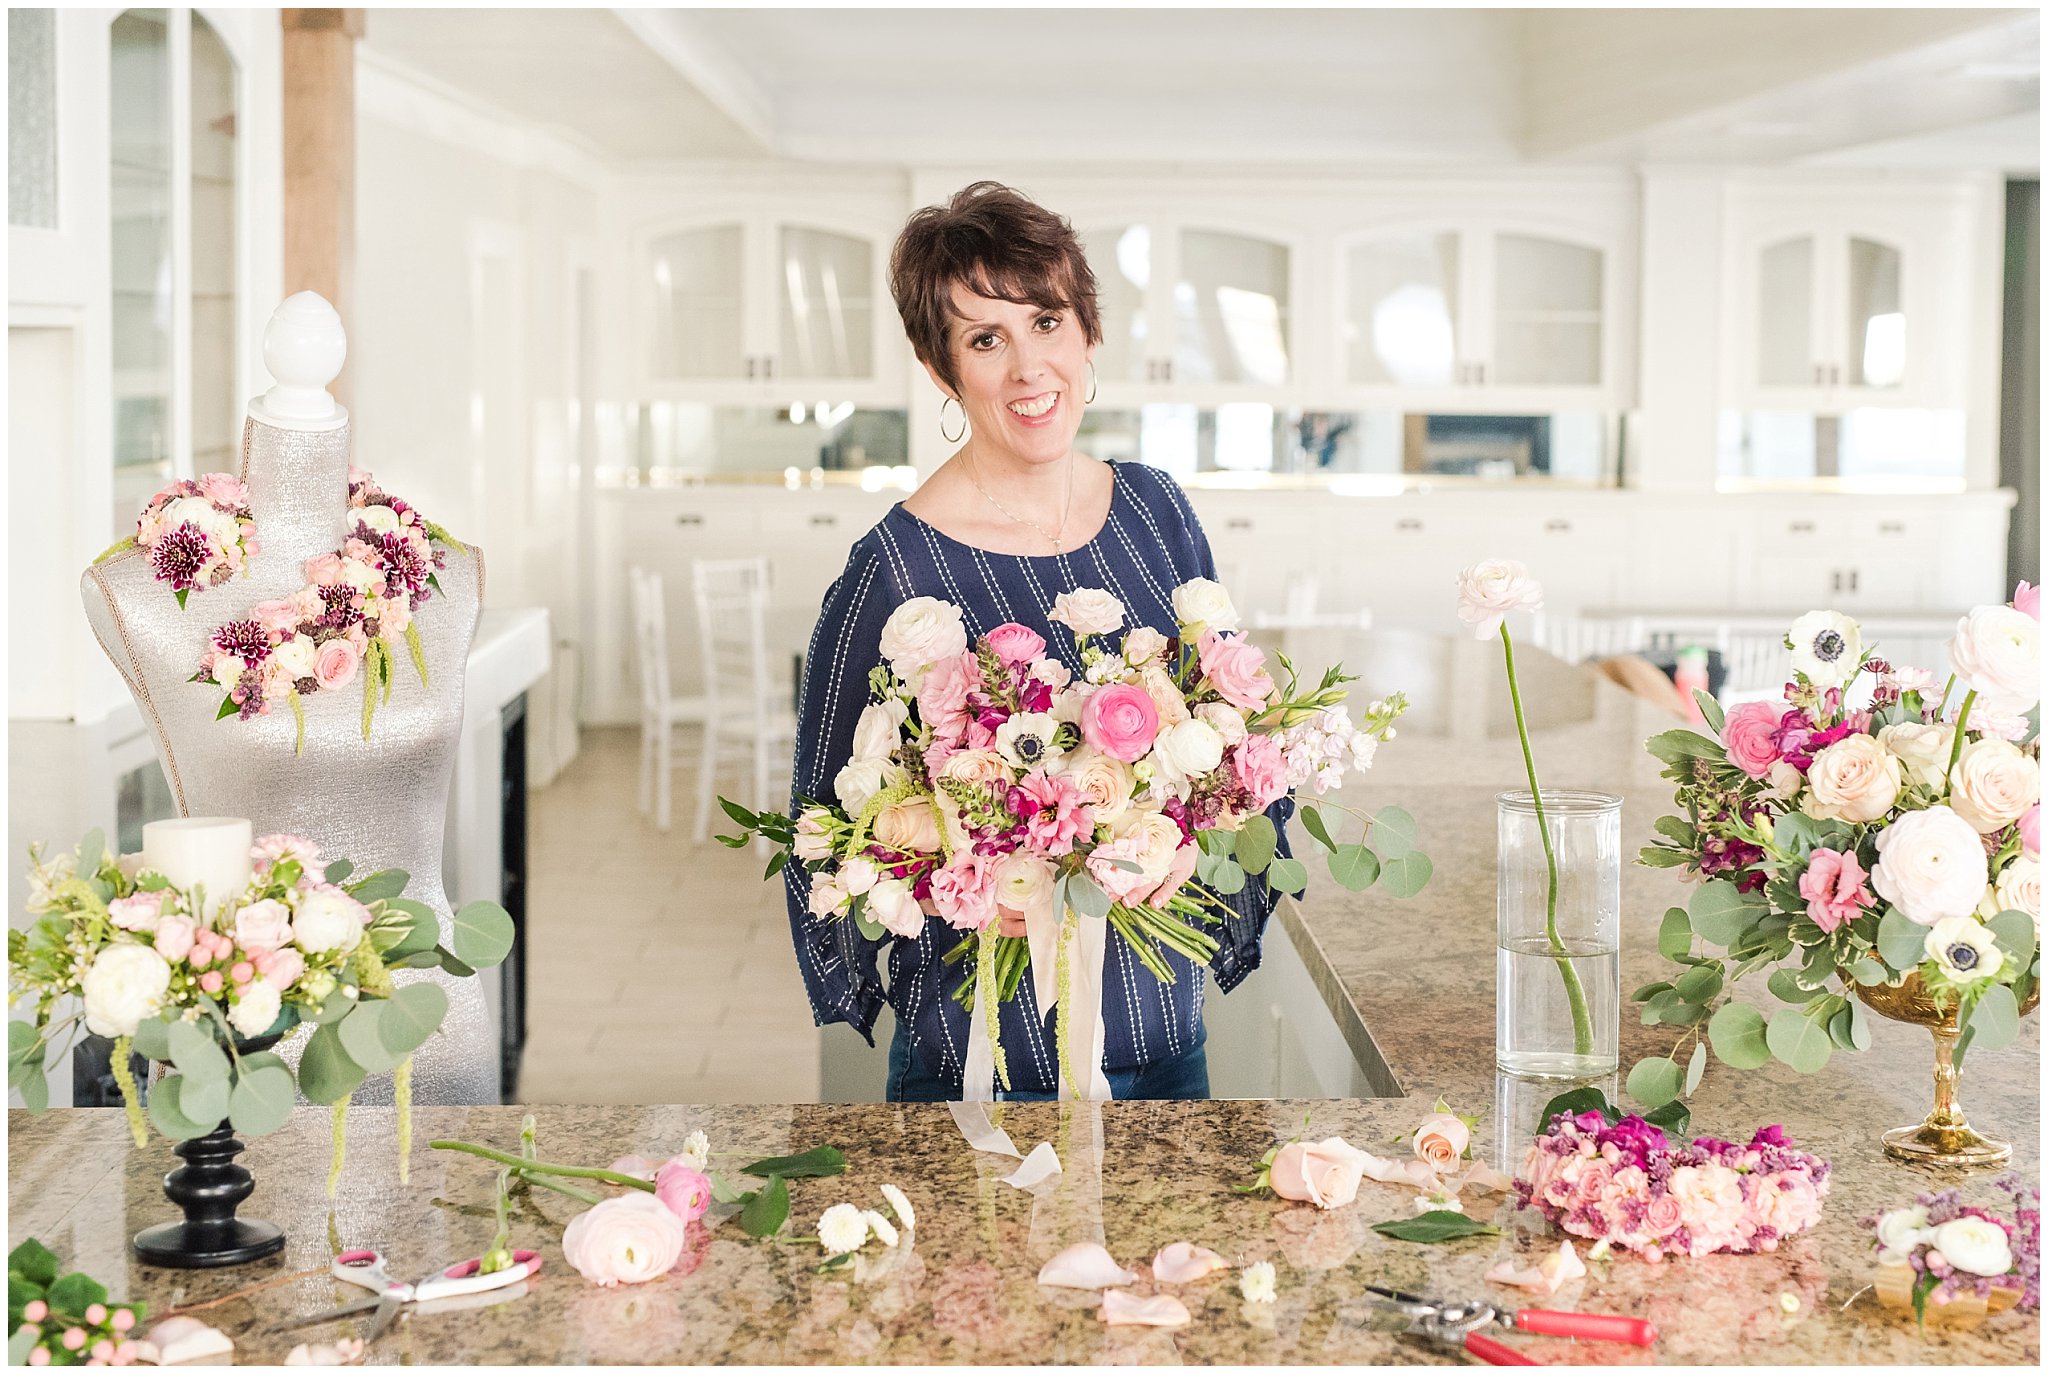 Florist surrounded by flowers | Dancing Daisies Floral | Jessie and Dallin Photography